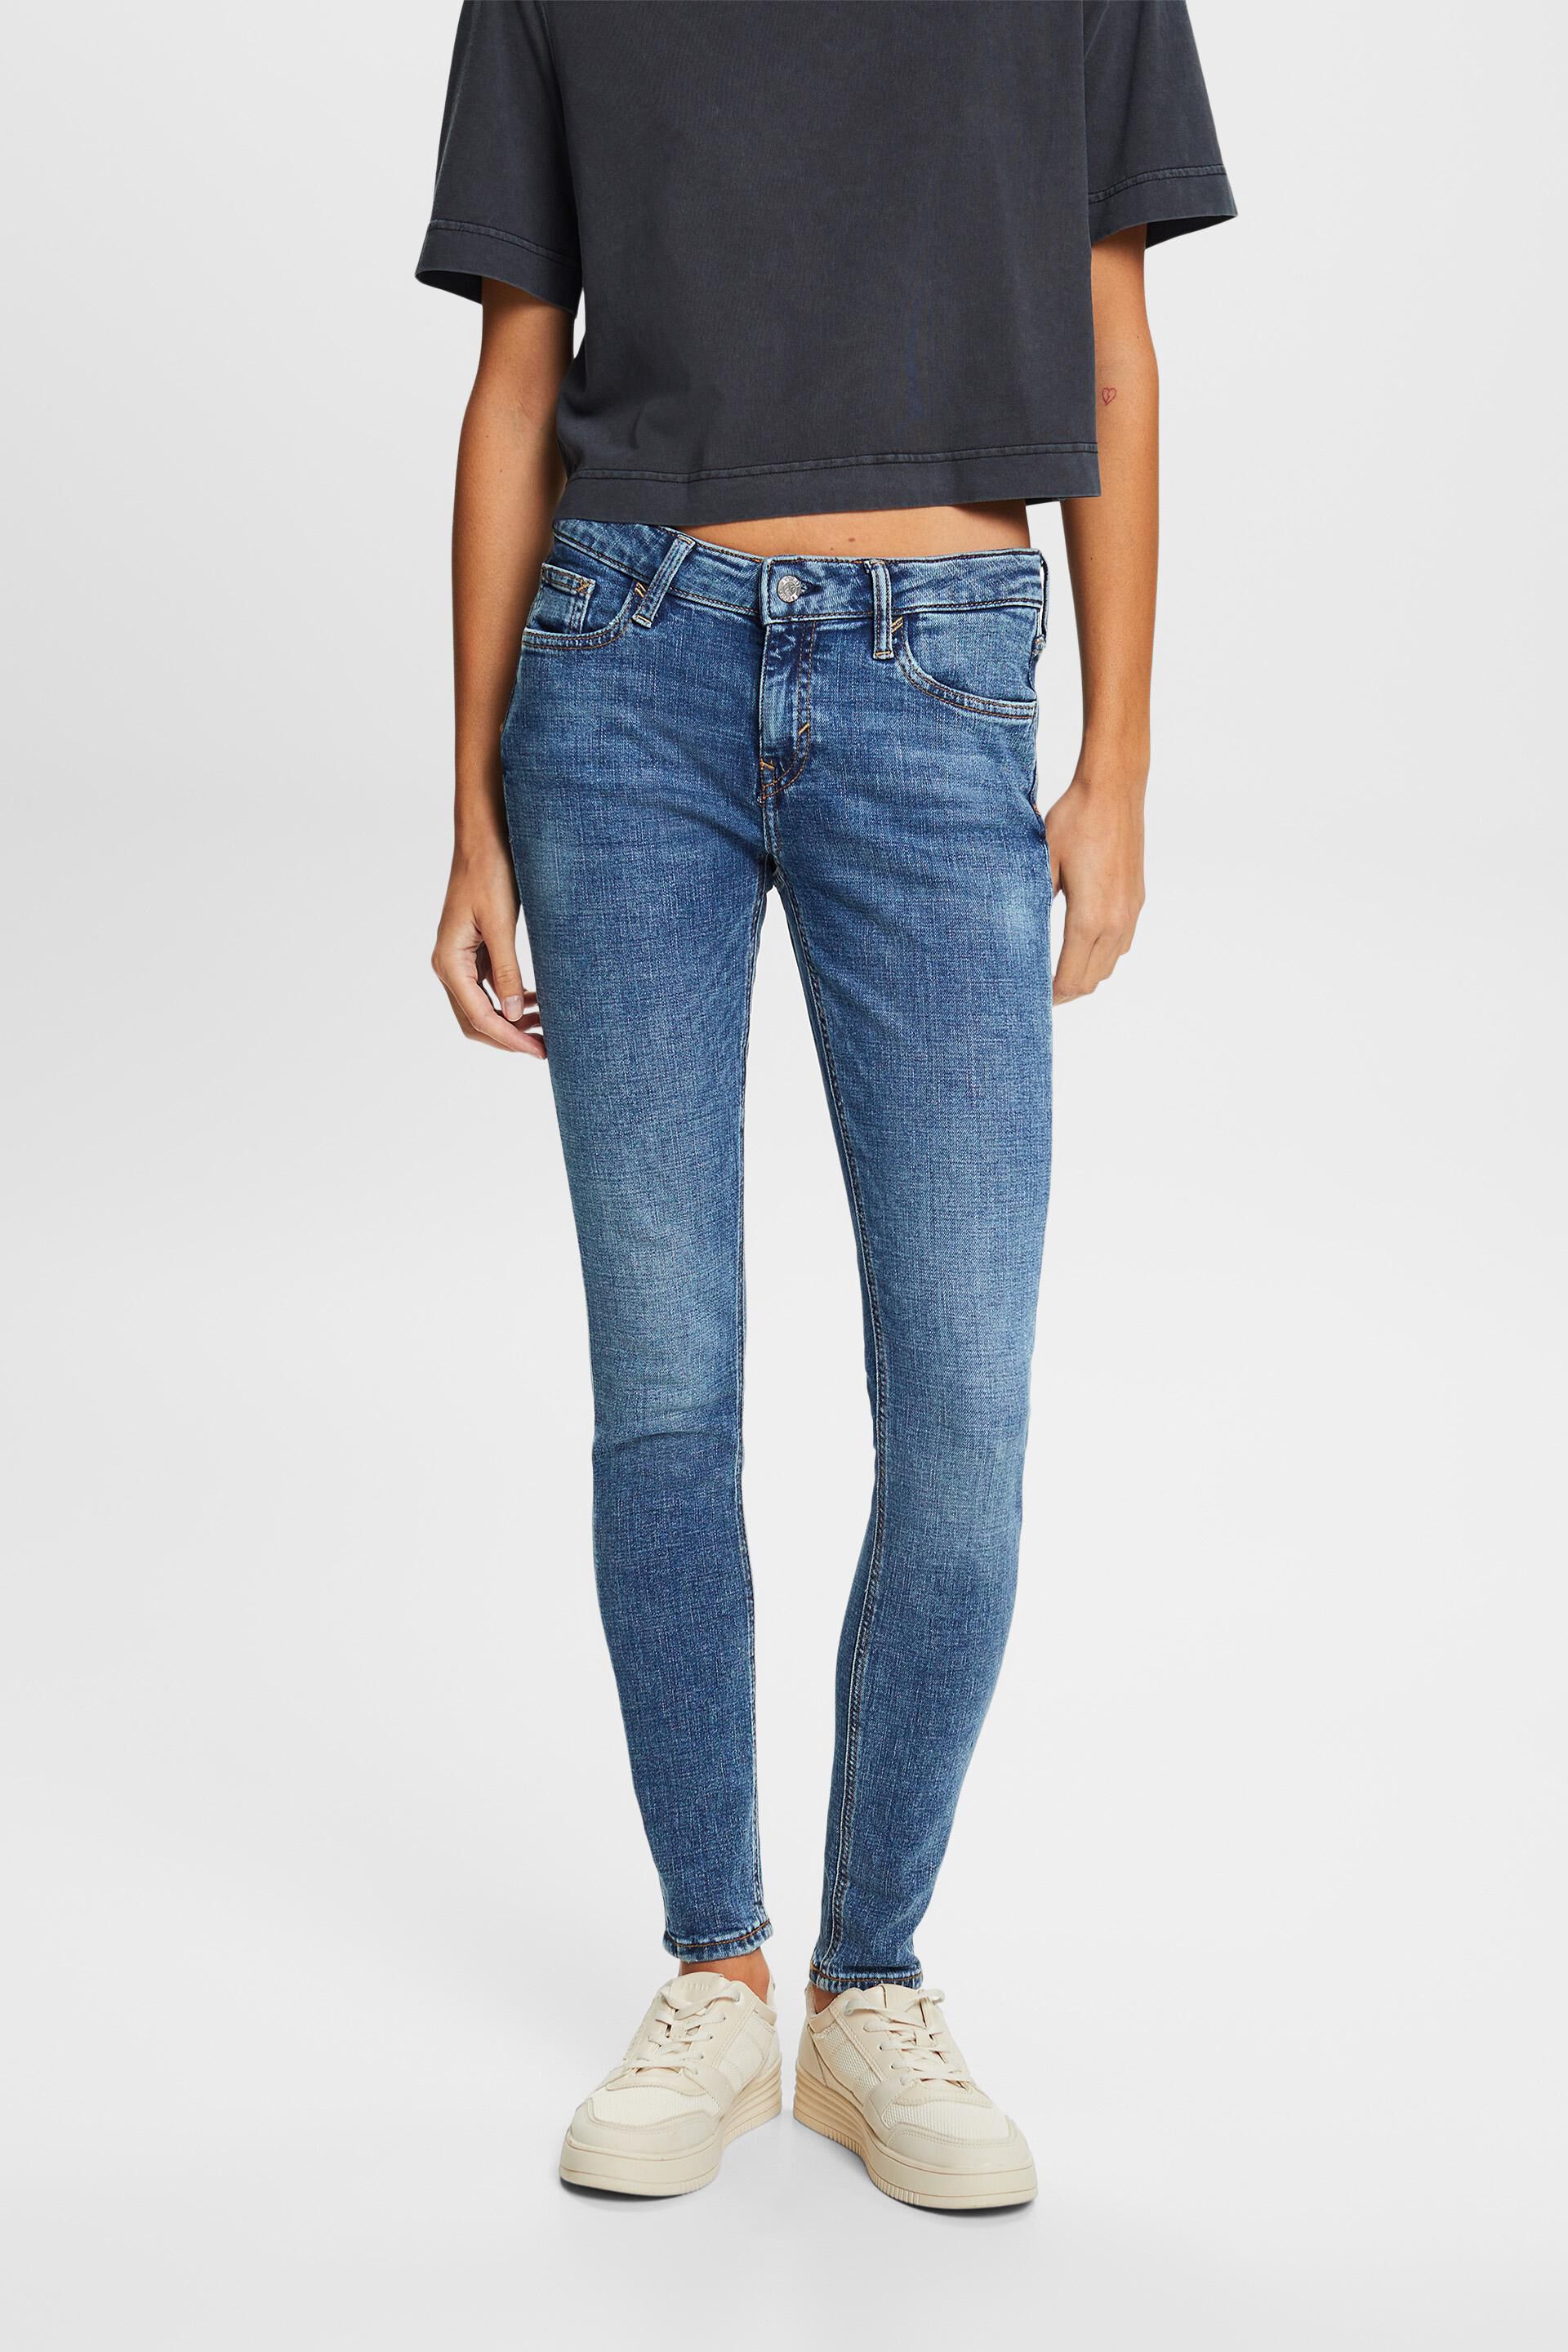 Esprit stretch skinny mid-rise Recycled: jeans fit